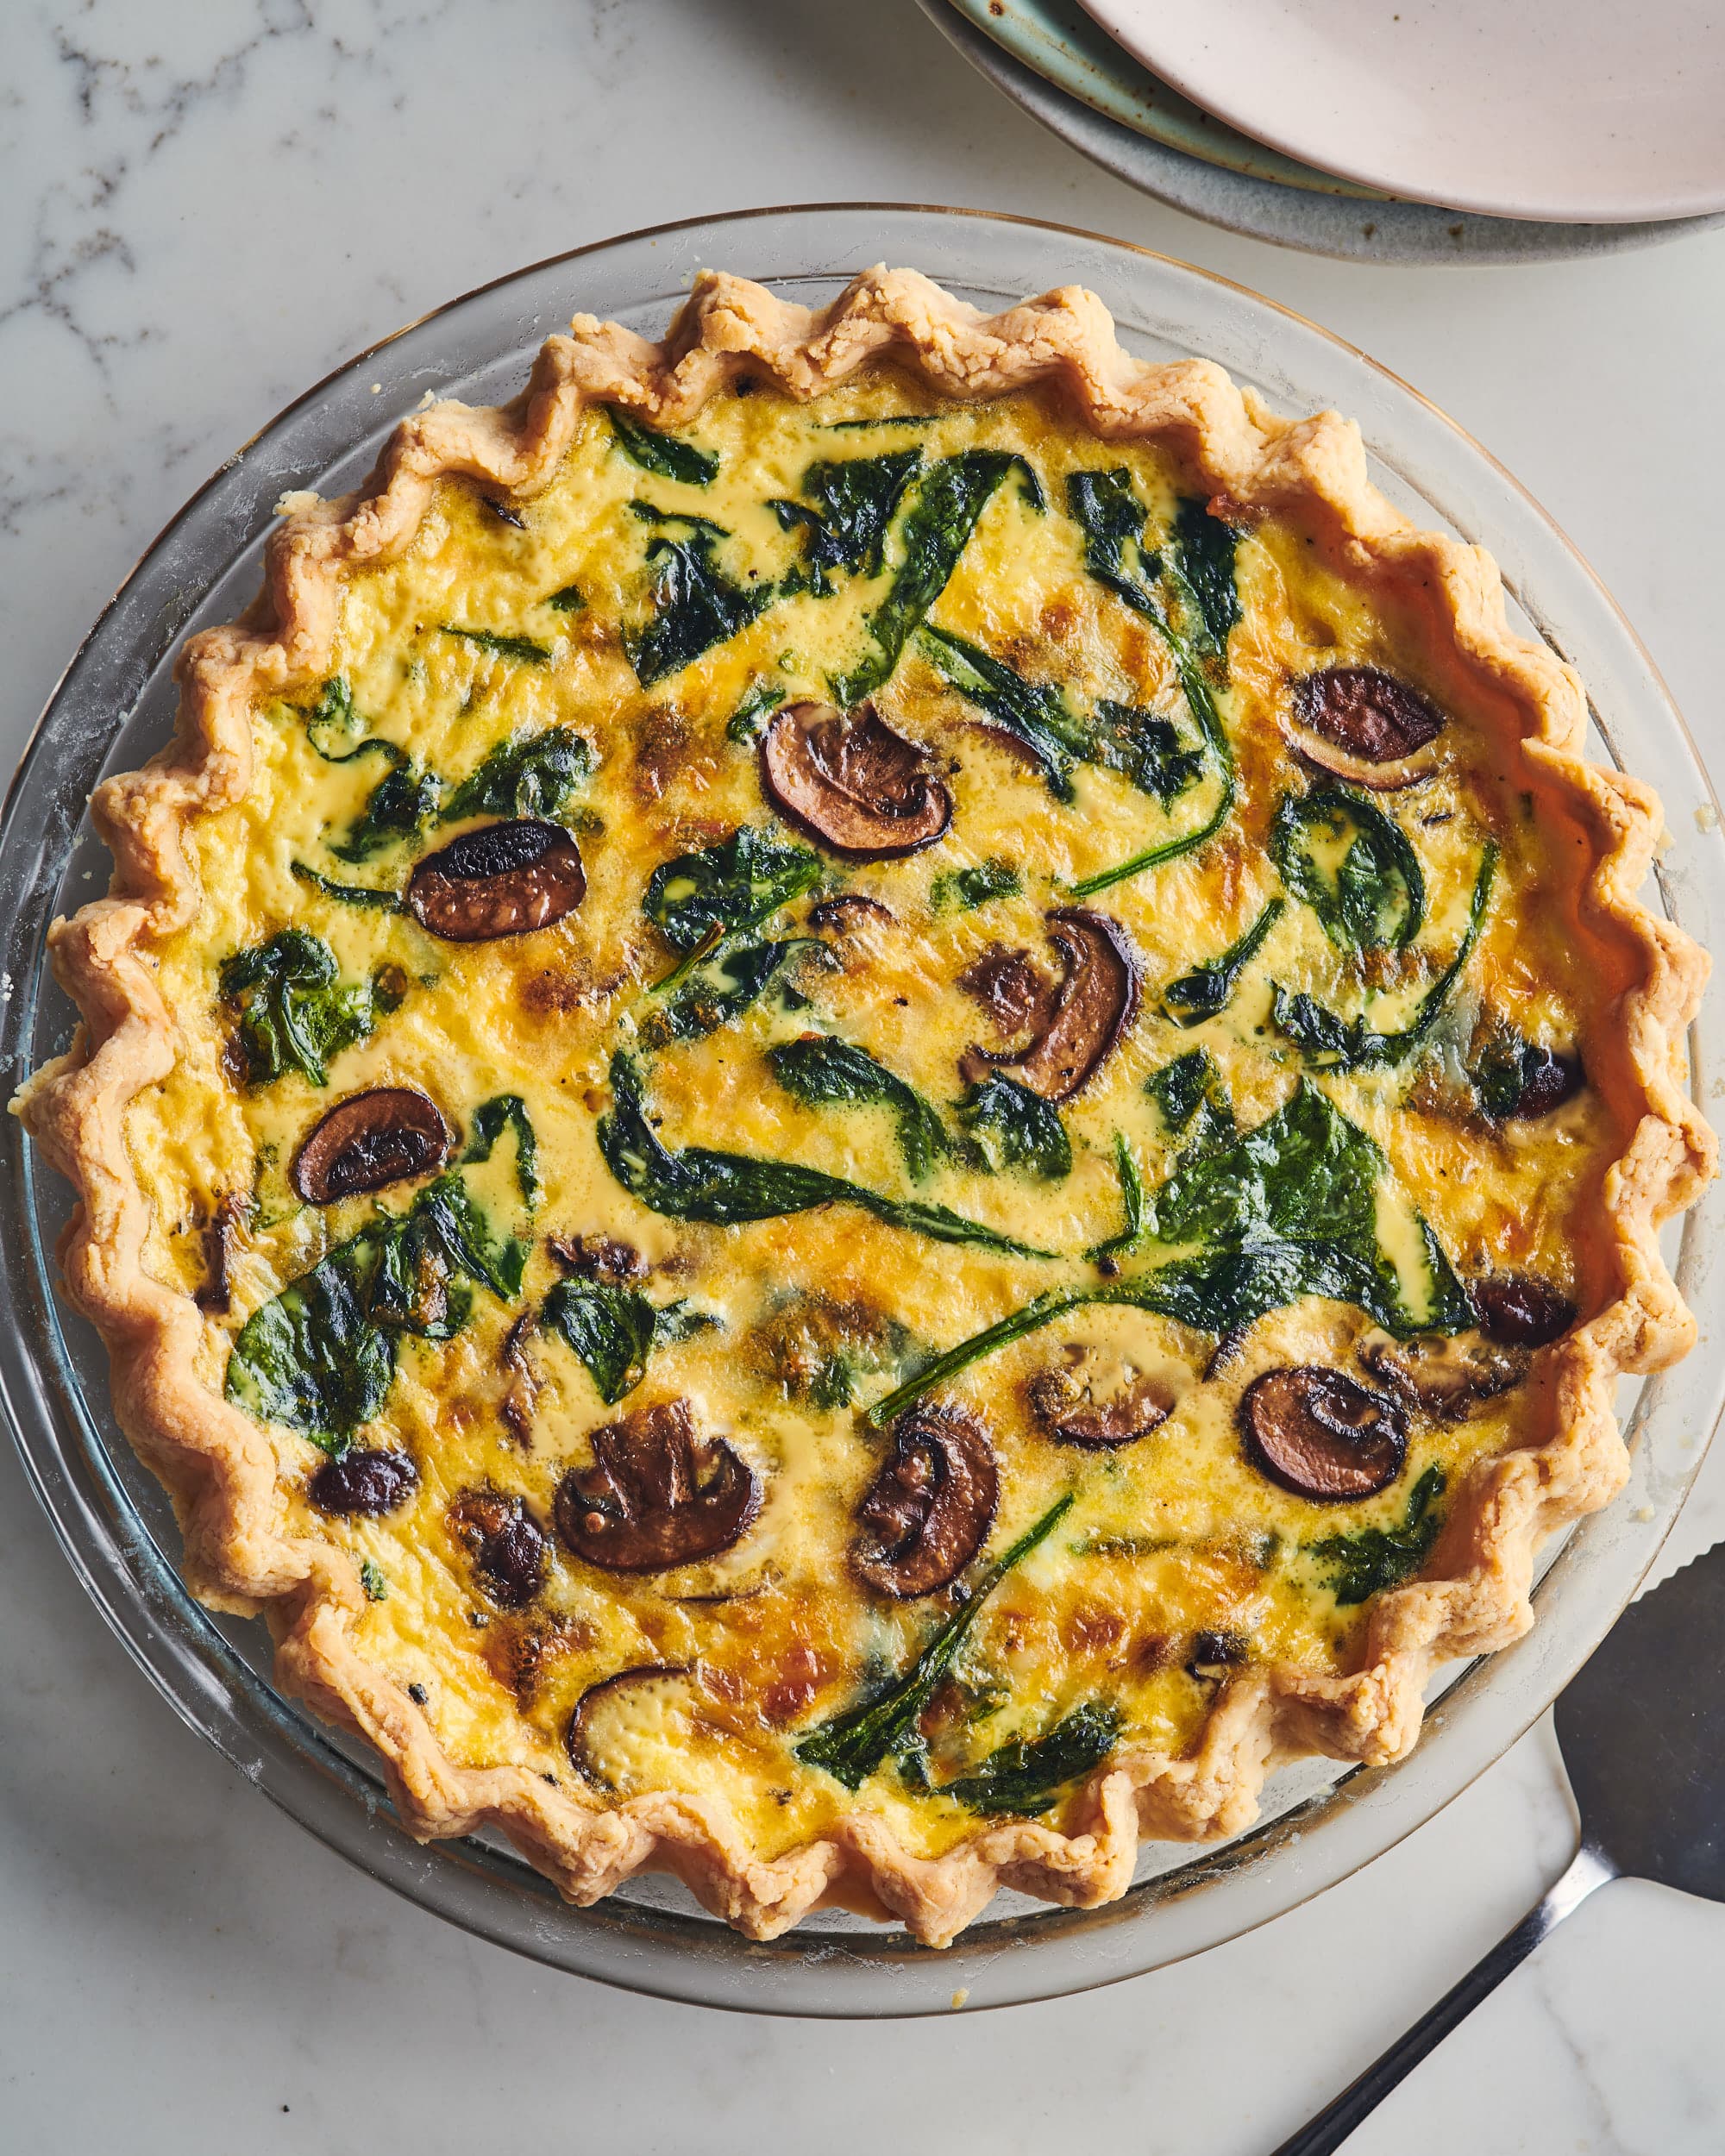 How To Make a Foolproof Quiche | Kitchn